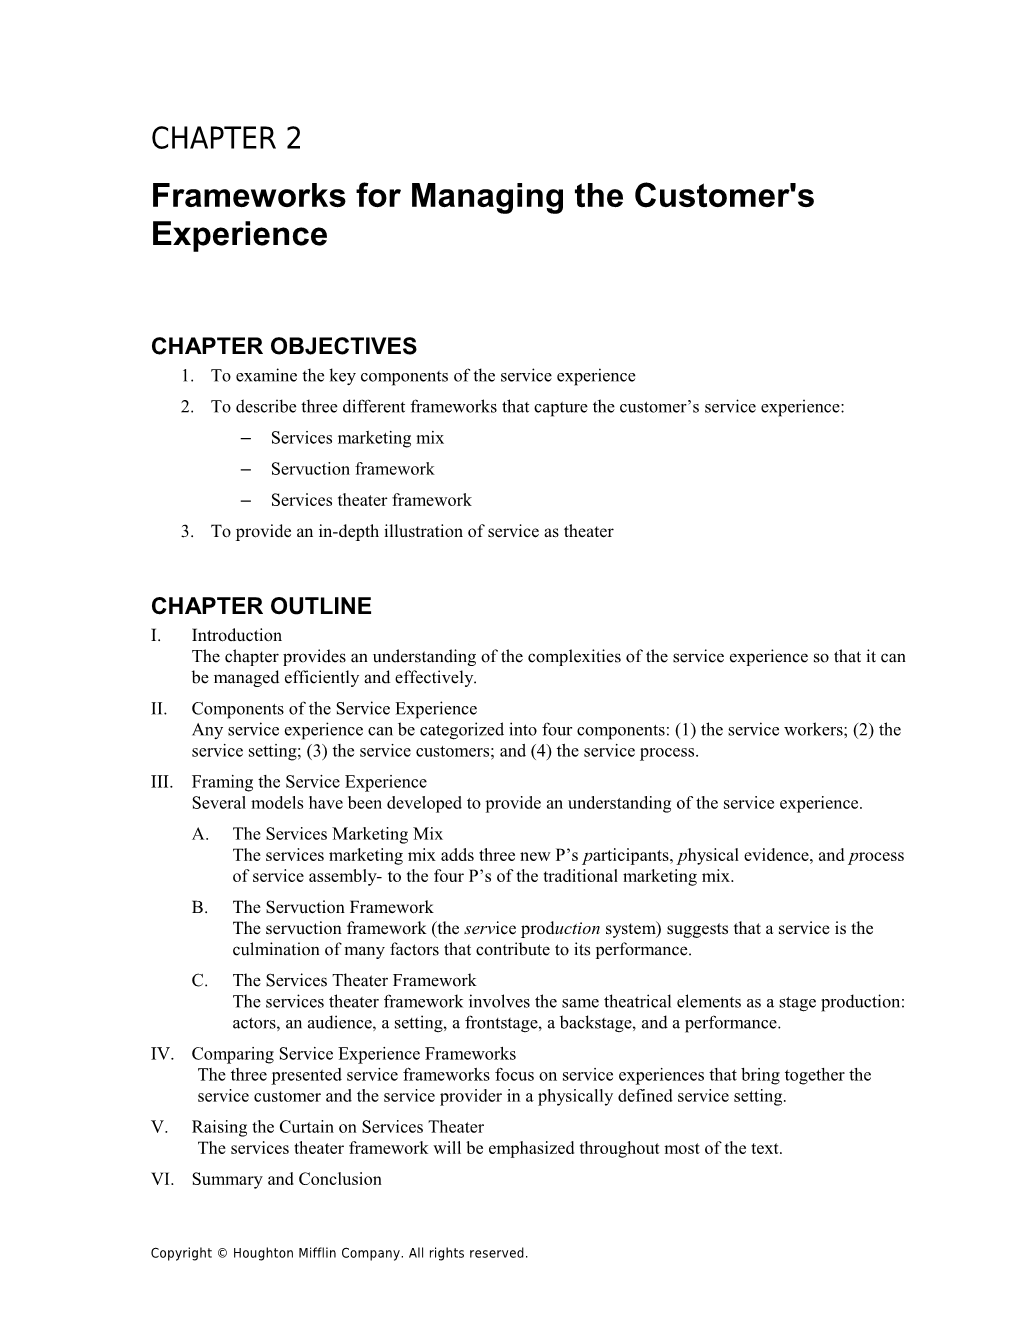 Frameworks for Managing the Customer's Experience